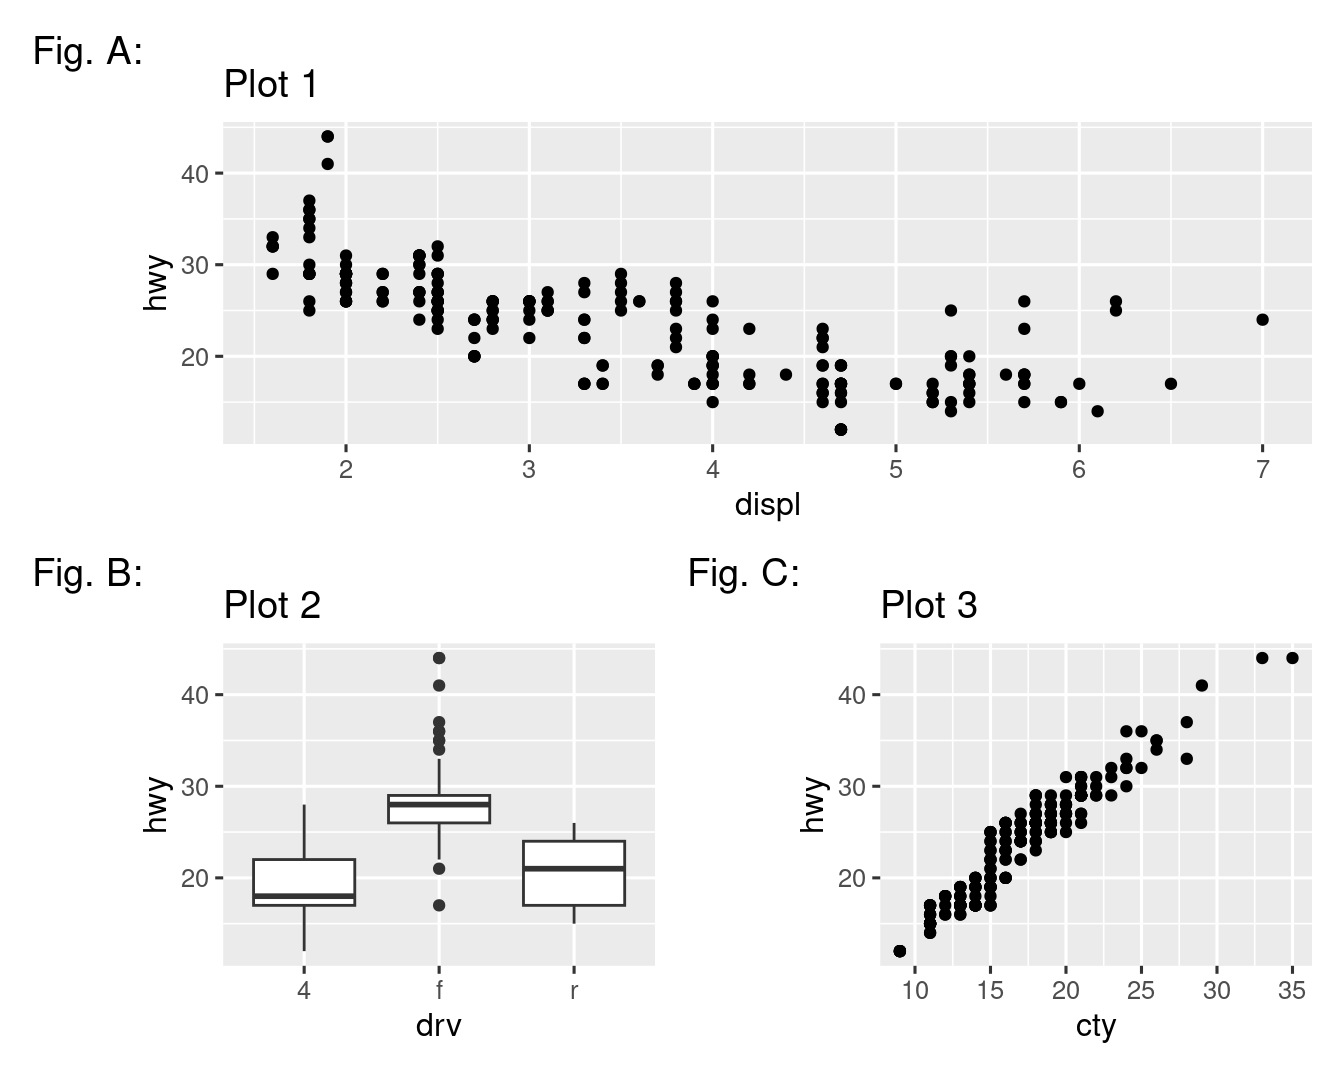 Three plots: Plot 1 is a scatterplot of highway mileage versus engine size. Plot 2 is side-by-side box plots of highway mileage versus drive train. Plot 3 is side-by-side box plots of city mileage versus drive train. Plots 1 is on the first row. Plots 2 and 3 are on the next row, each span half the width of Plot 1. Plot 1 is labelled "Fig. A", Plot 2 is labelled "Fig. B", and Plot 3 is labelled "Fig. C".